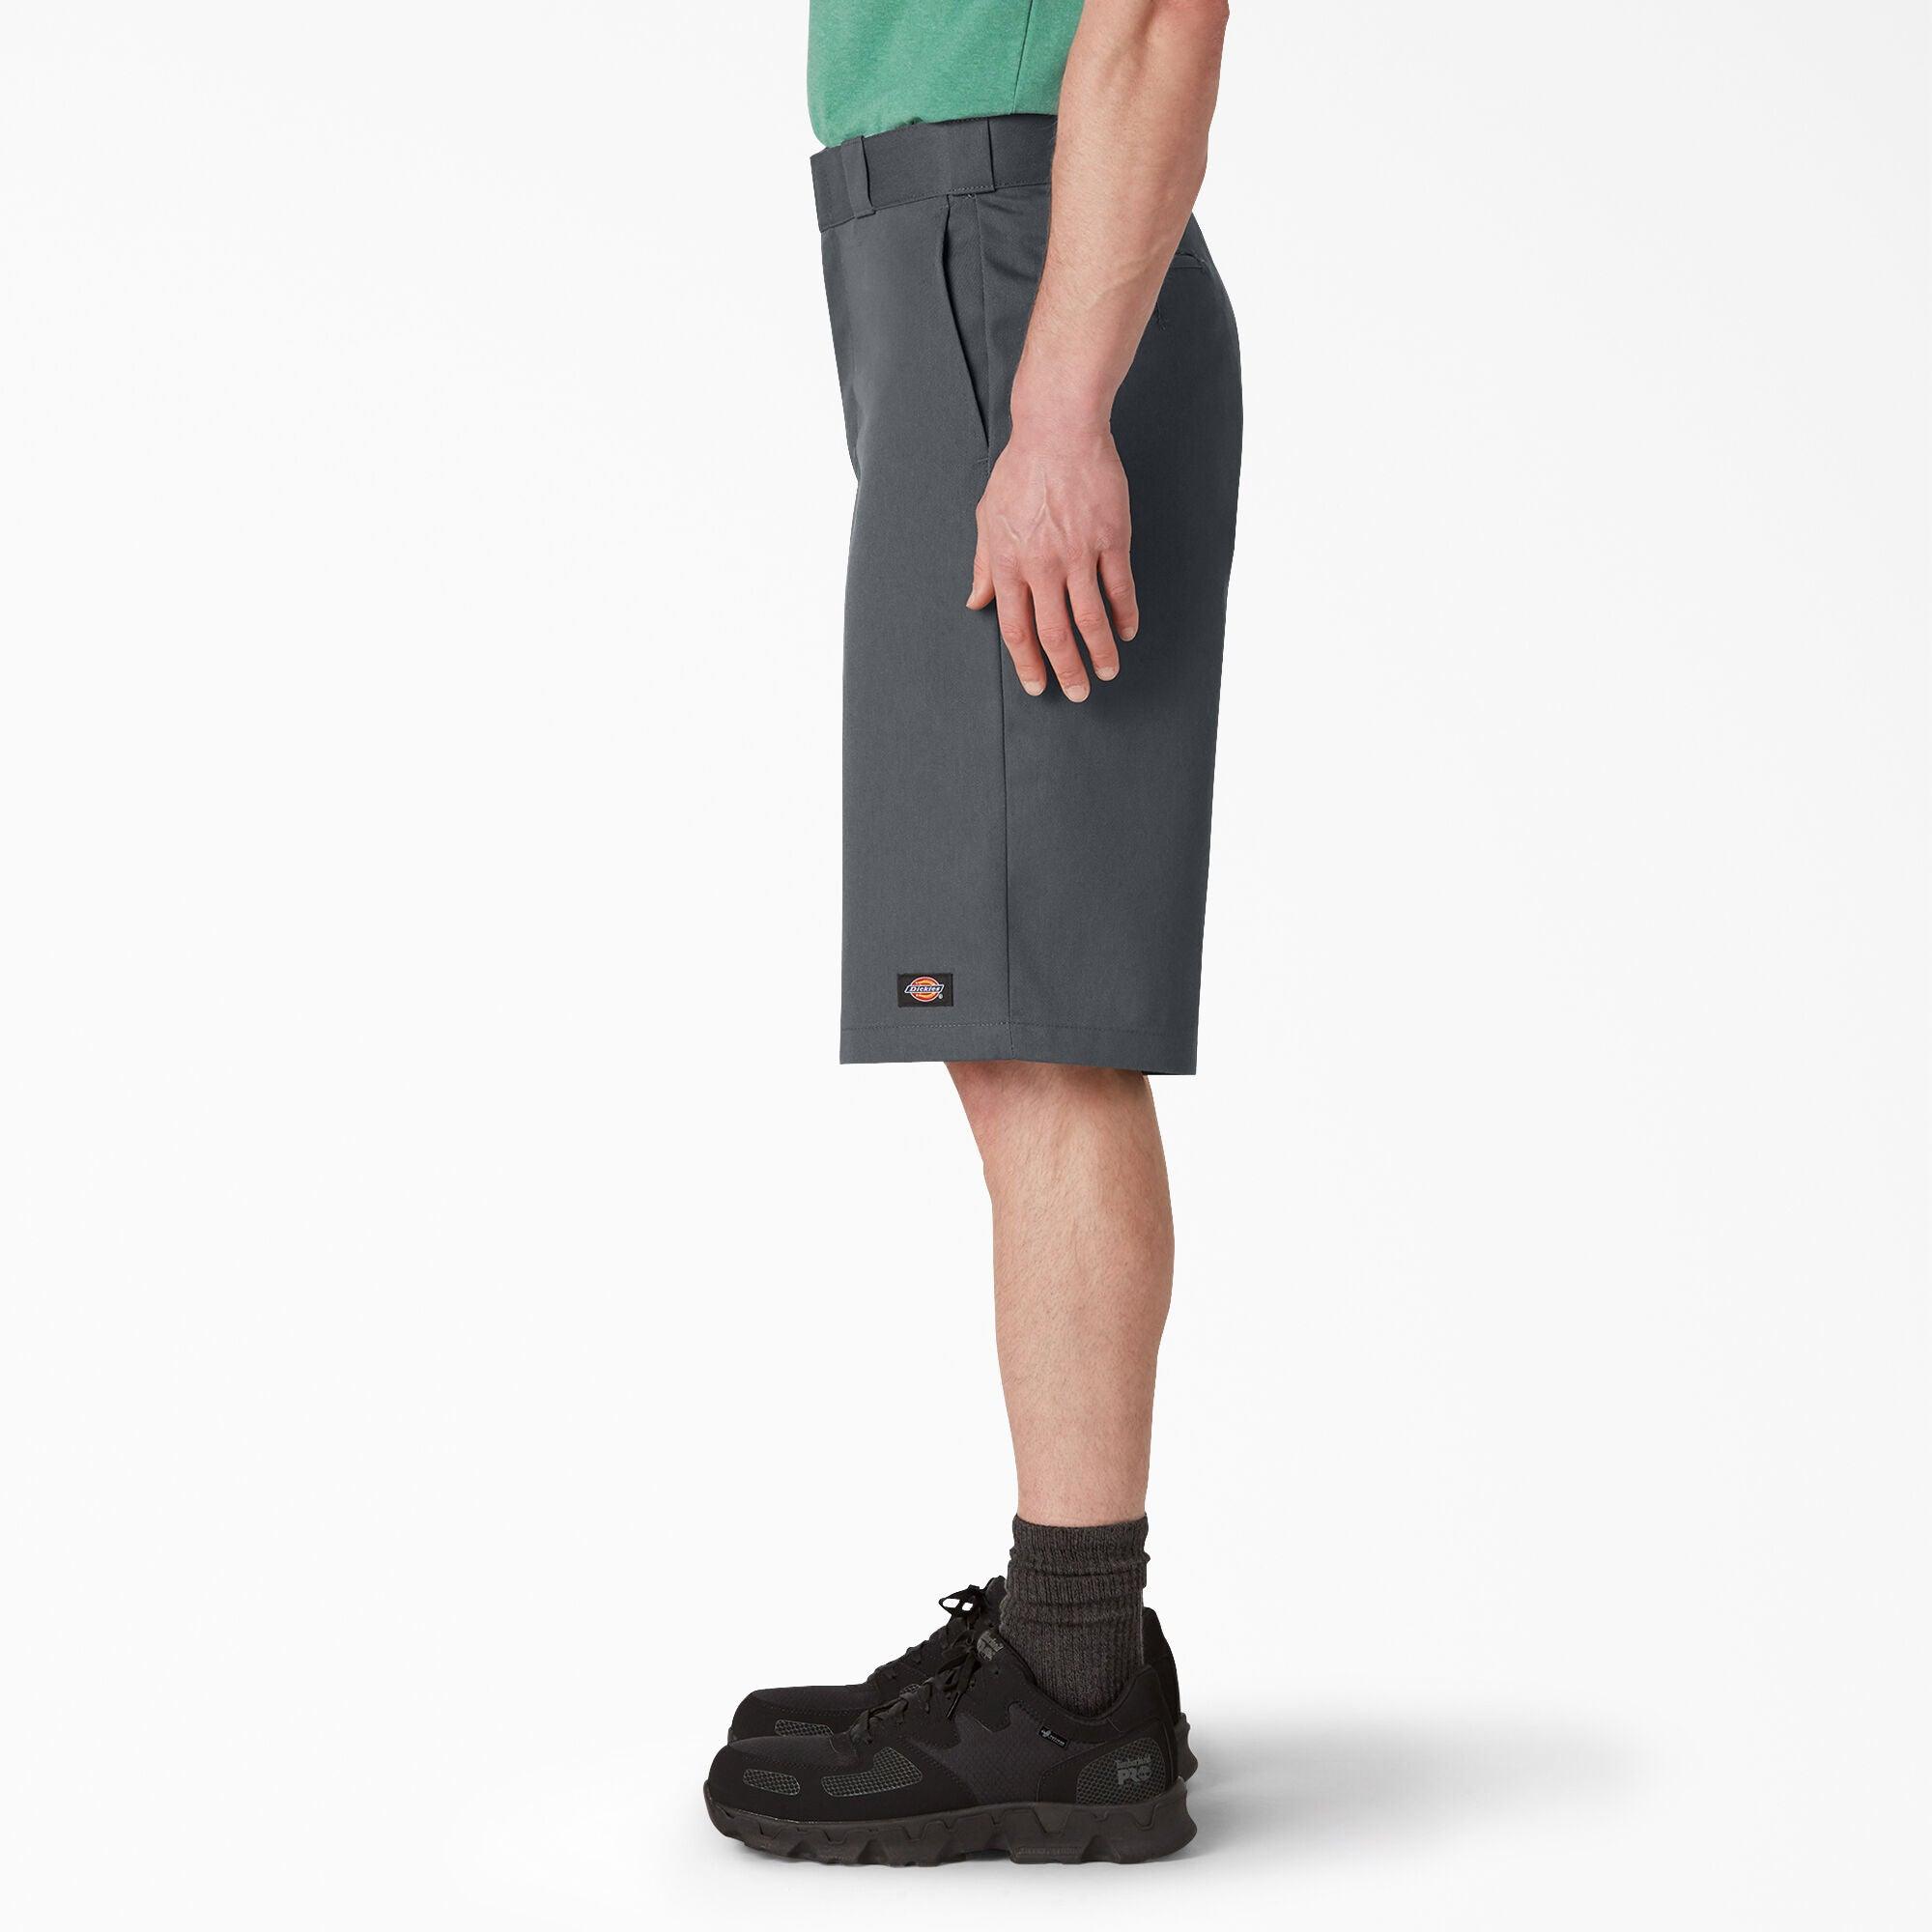 13 Relaxed Fit Multi-Pocket Work Shorts, Men's Shorts